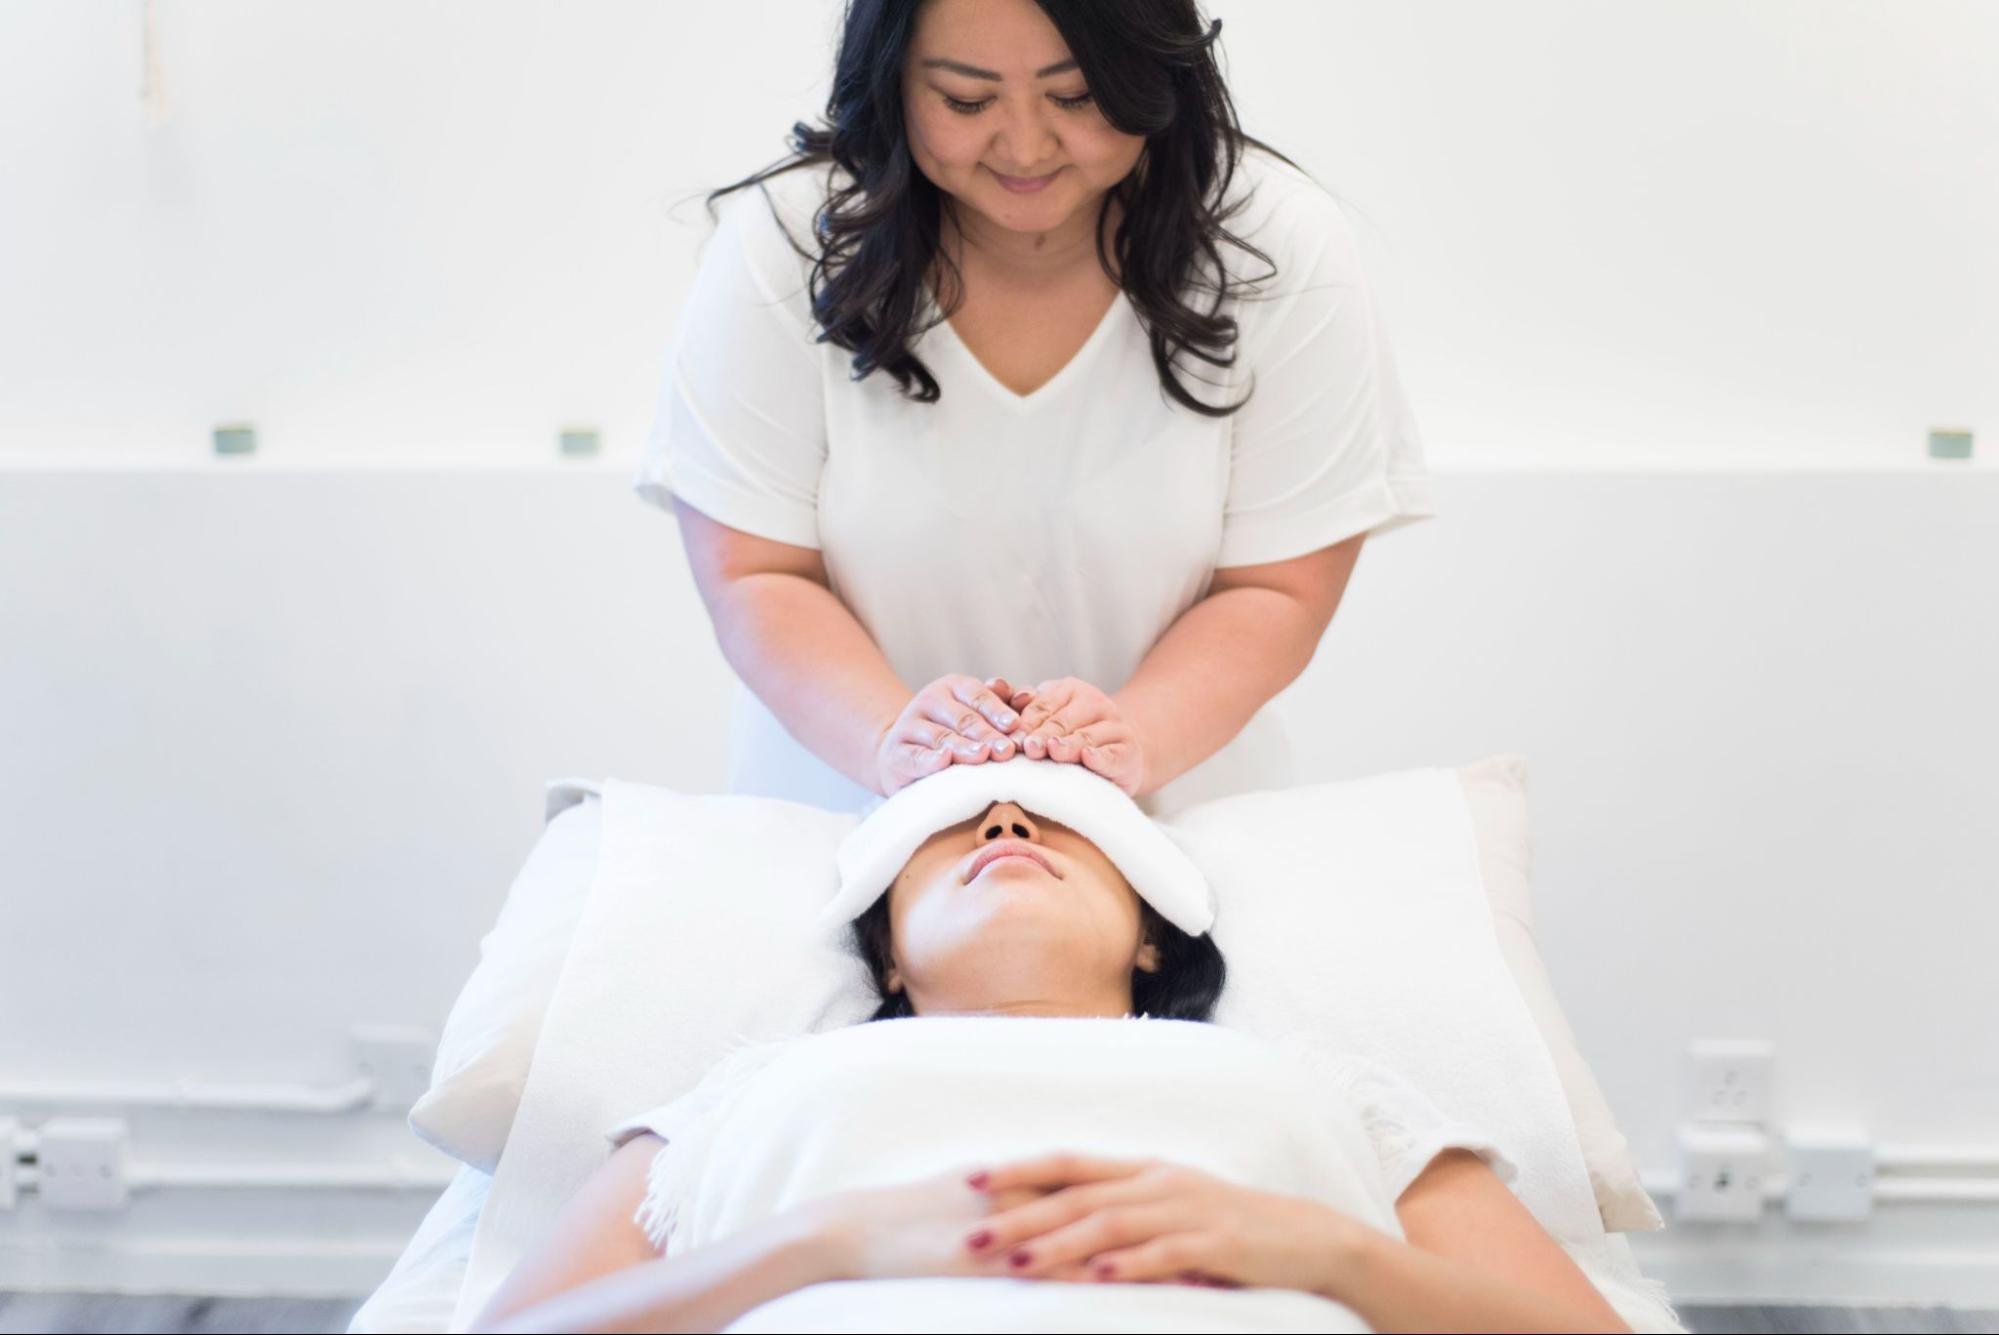 What Reiki Is And Isn’t - The Misconceptions of Reiki and Reiki Sessions